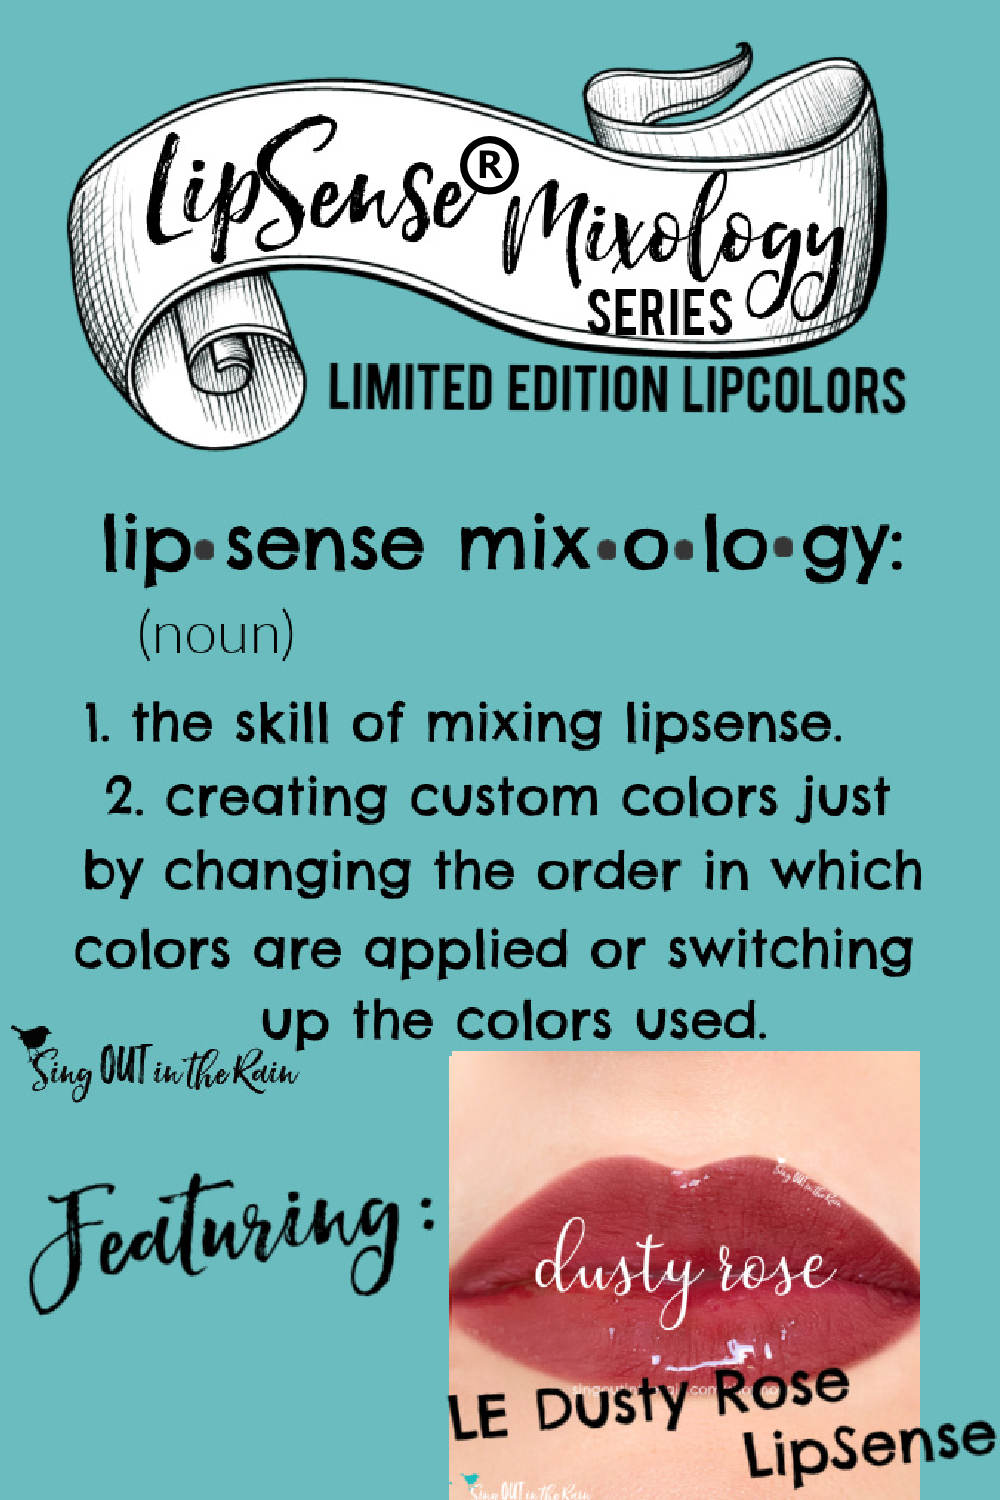 The Ultimate Guide to Dusty Rose LipSense Mixology